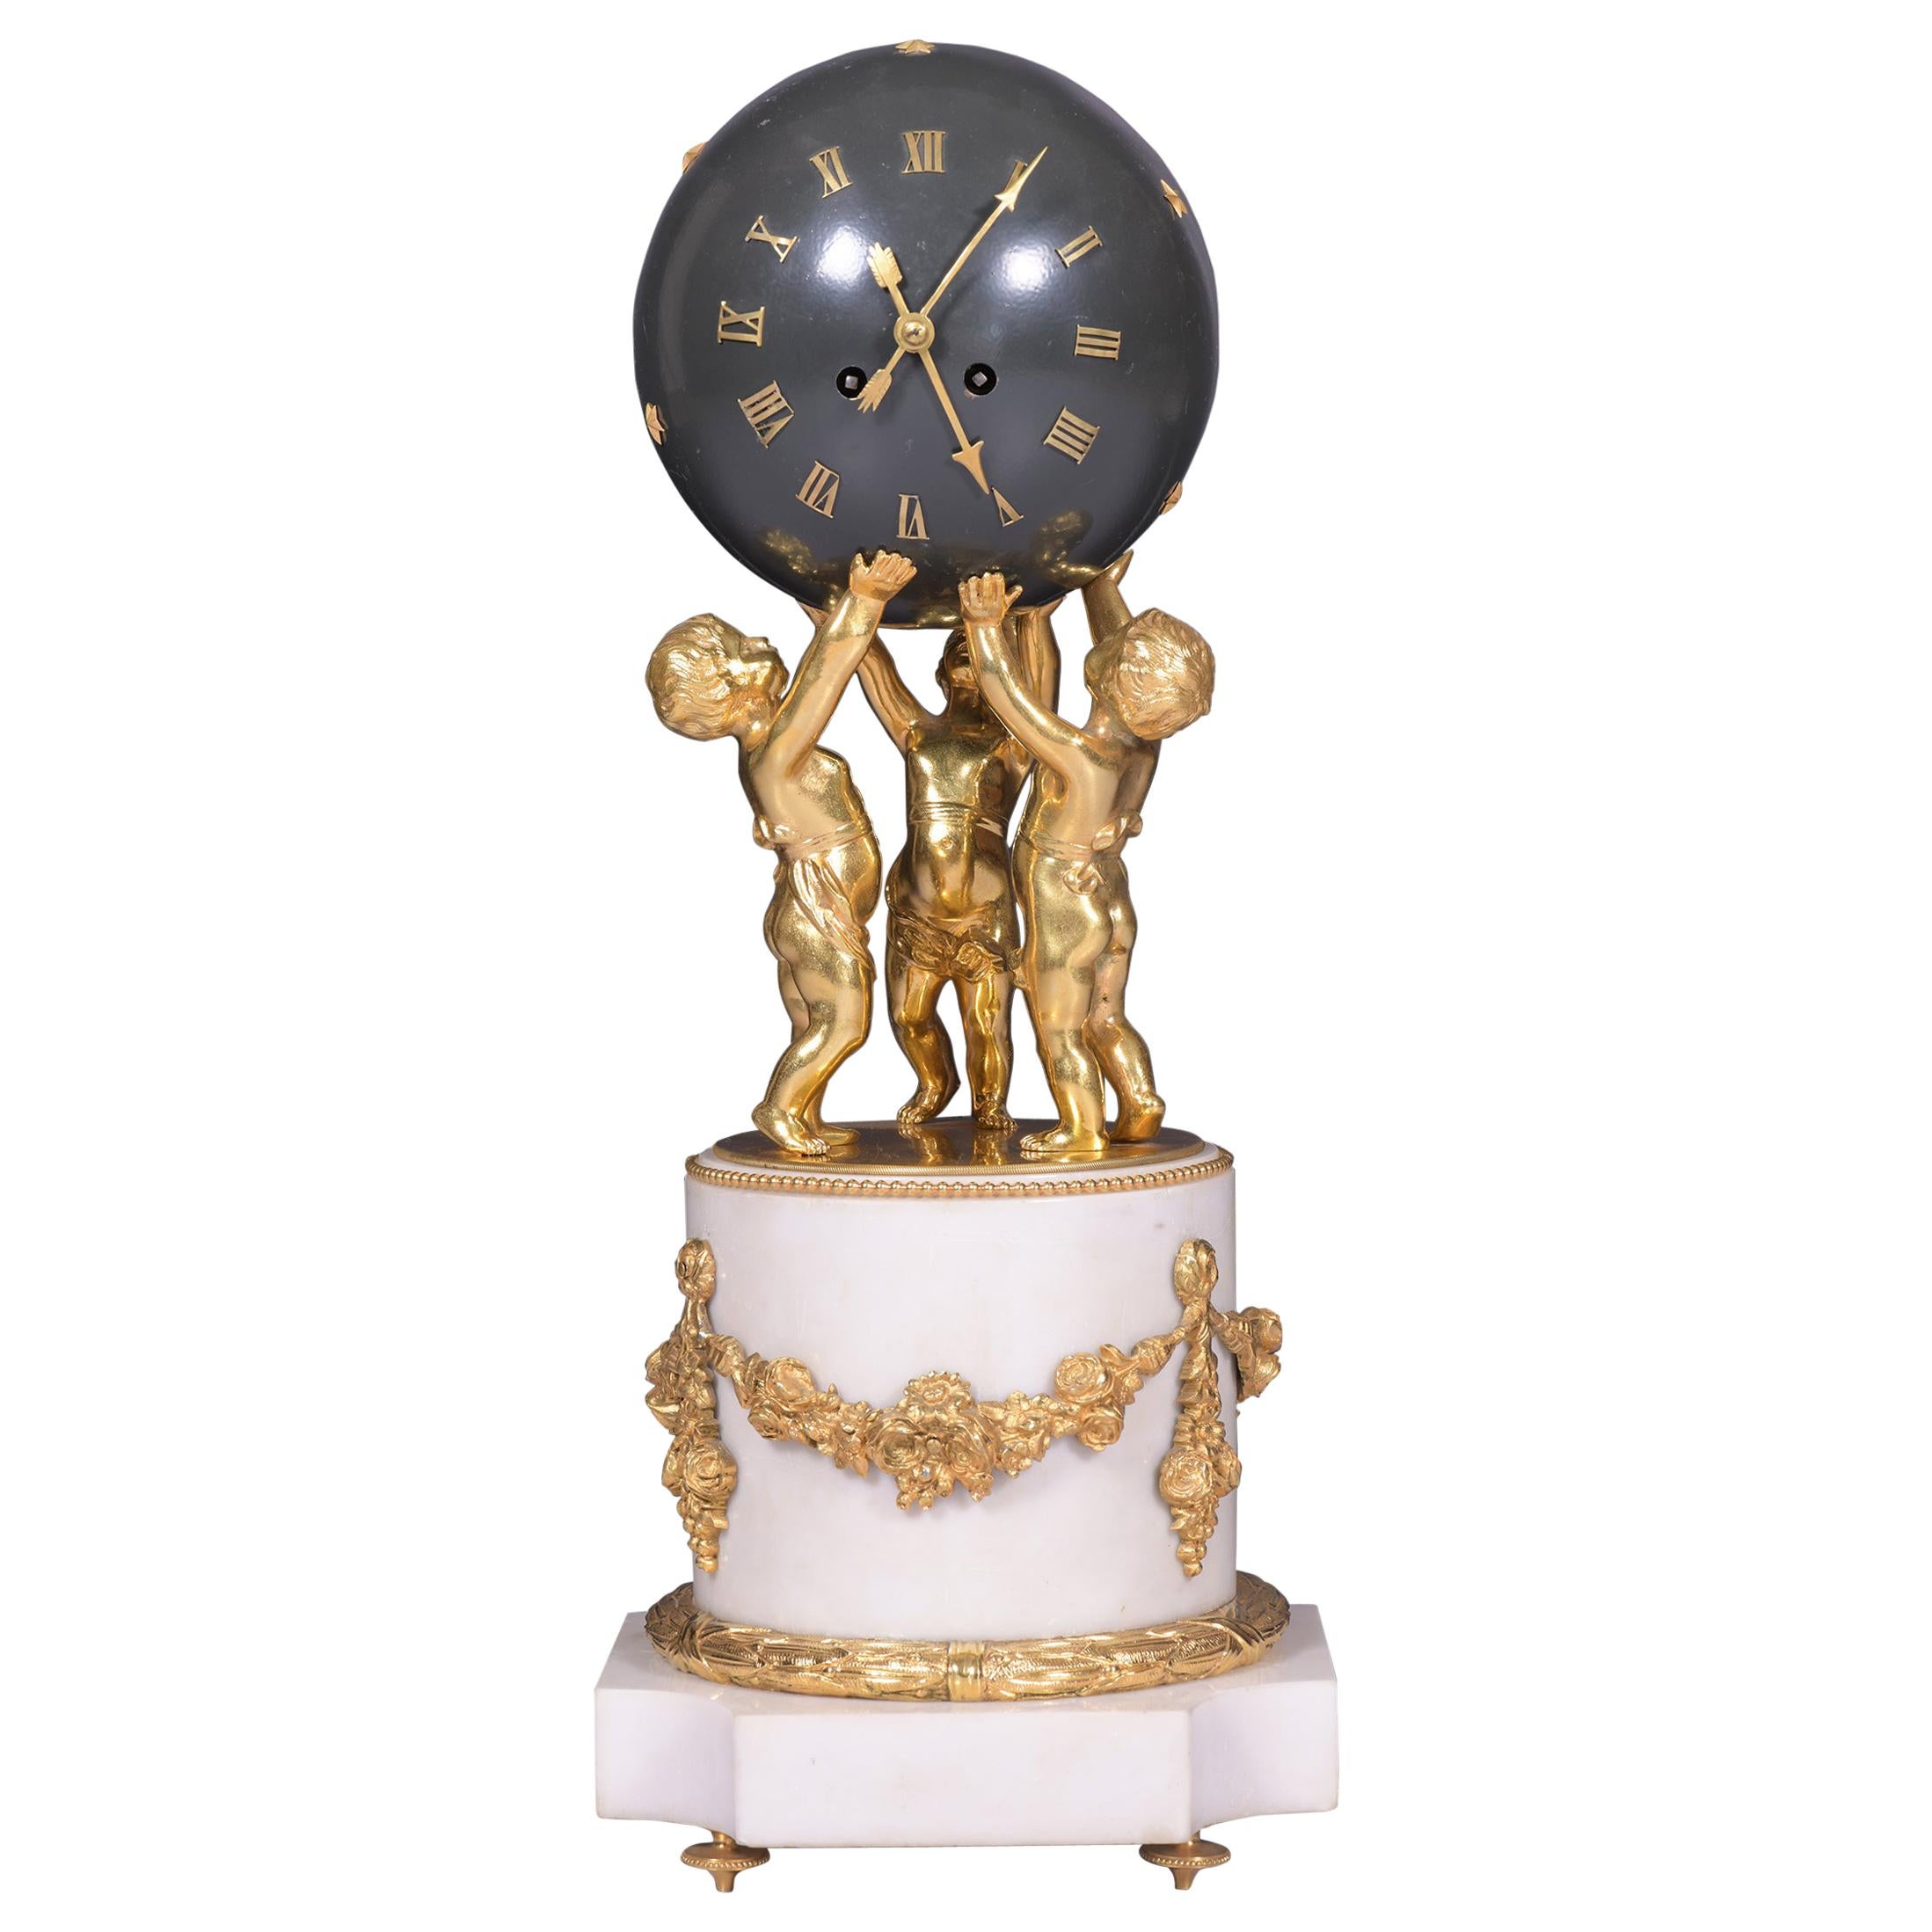 Antique 19th Century French Marble Figural Globe Clock by Vincenti et Cie